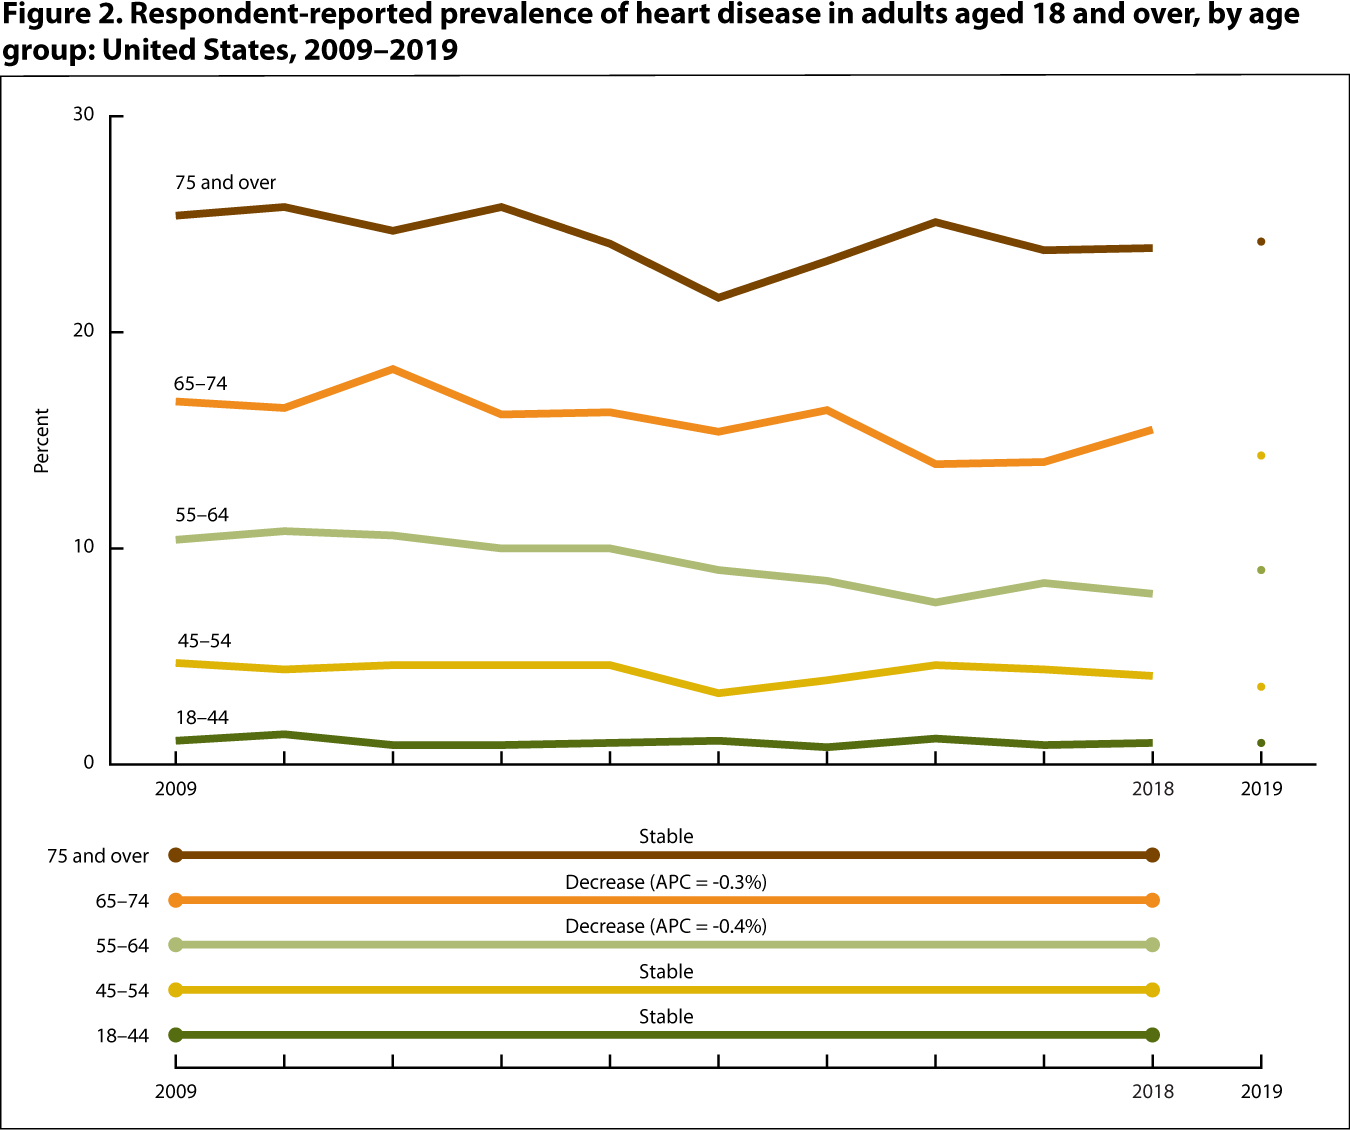 Figure 2 is a line graph showing the percentage of respondent-reported heart disease among adults, by age group for 2009 through 2018 and at 2019 (point).